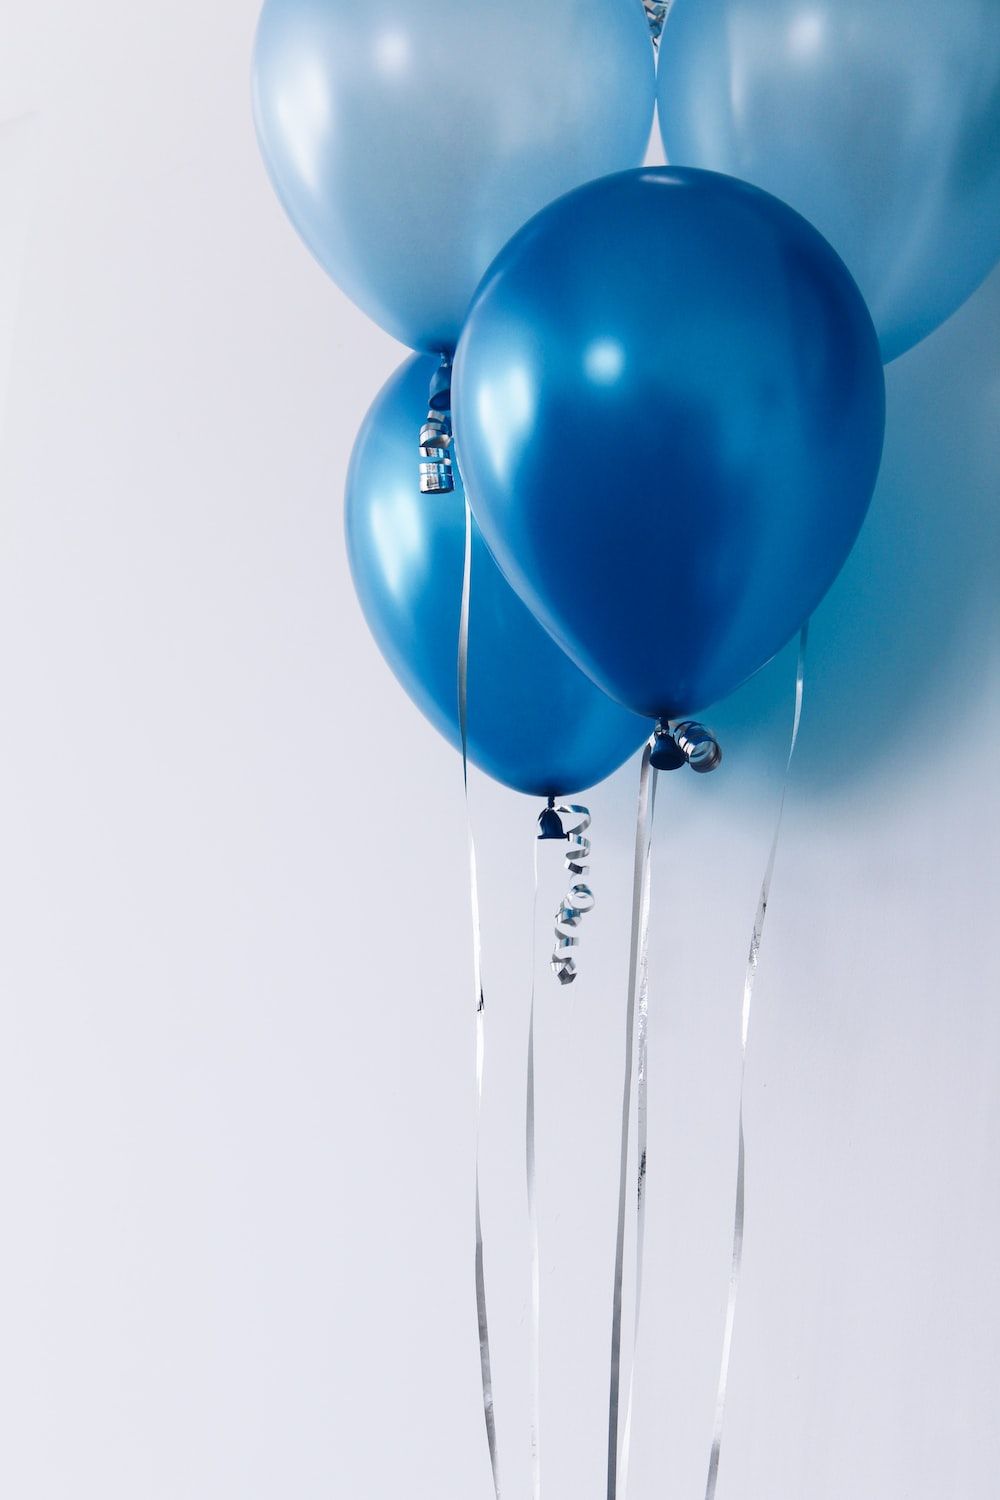 Blue Balloons Picture. Download Free Image